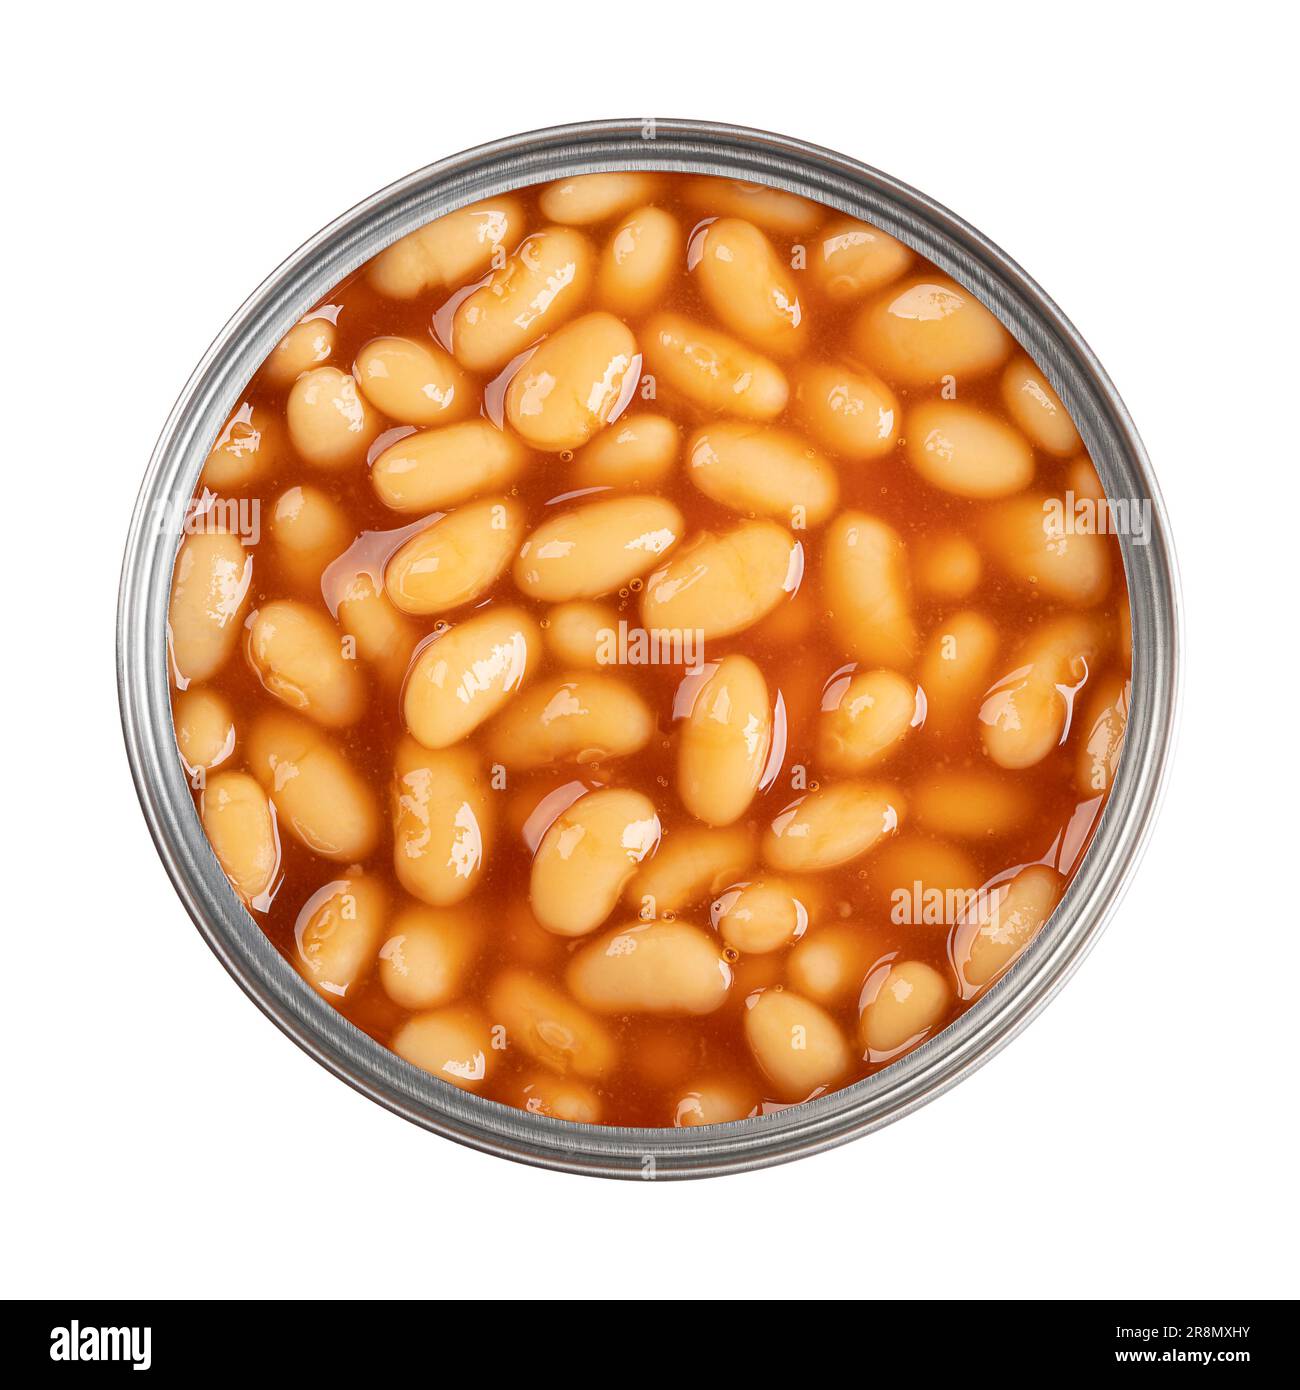 Canned baked beans in tomato sauce, in open can, from above. Dish made of white beans, cooked through a steam process. Convenience food. Stock Photo